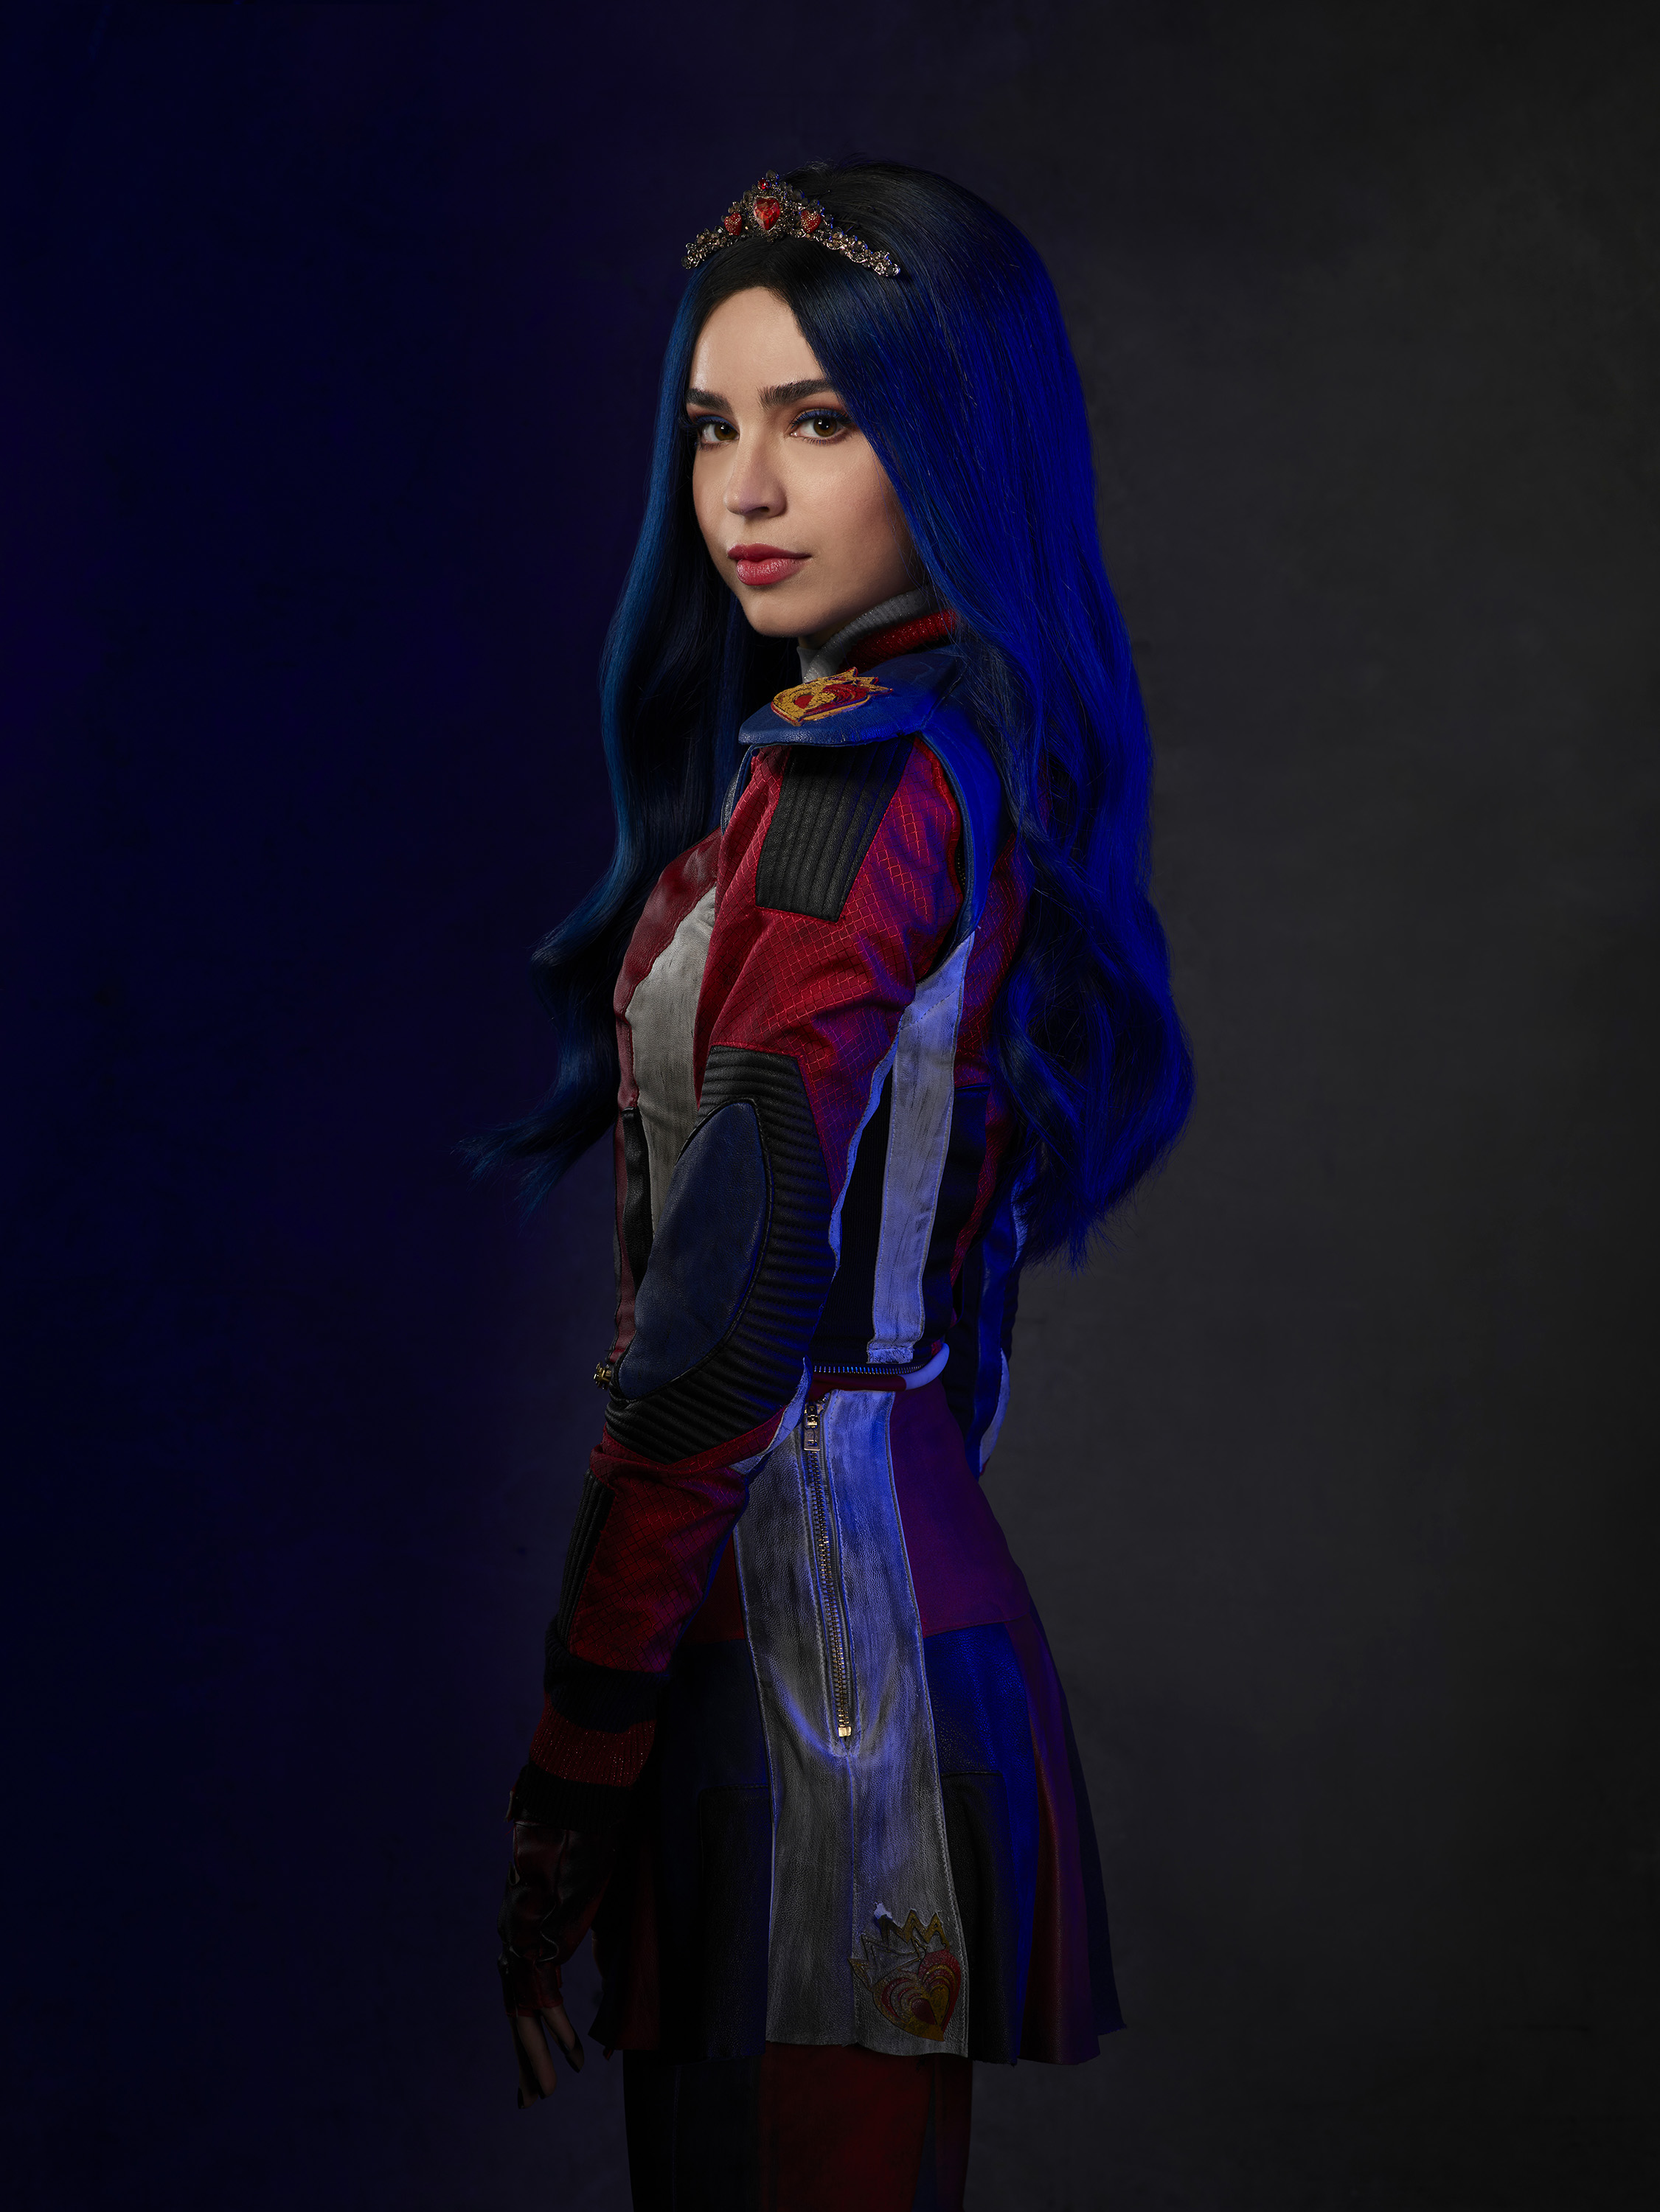 Is 'Descendants 4' Happening? Cast's Quotes About Another Movie | J-14